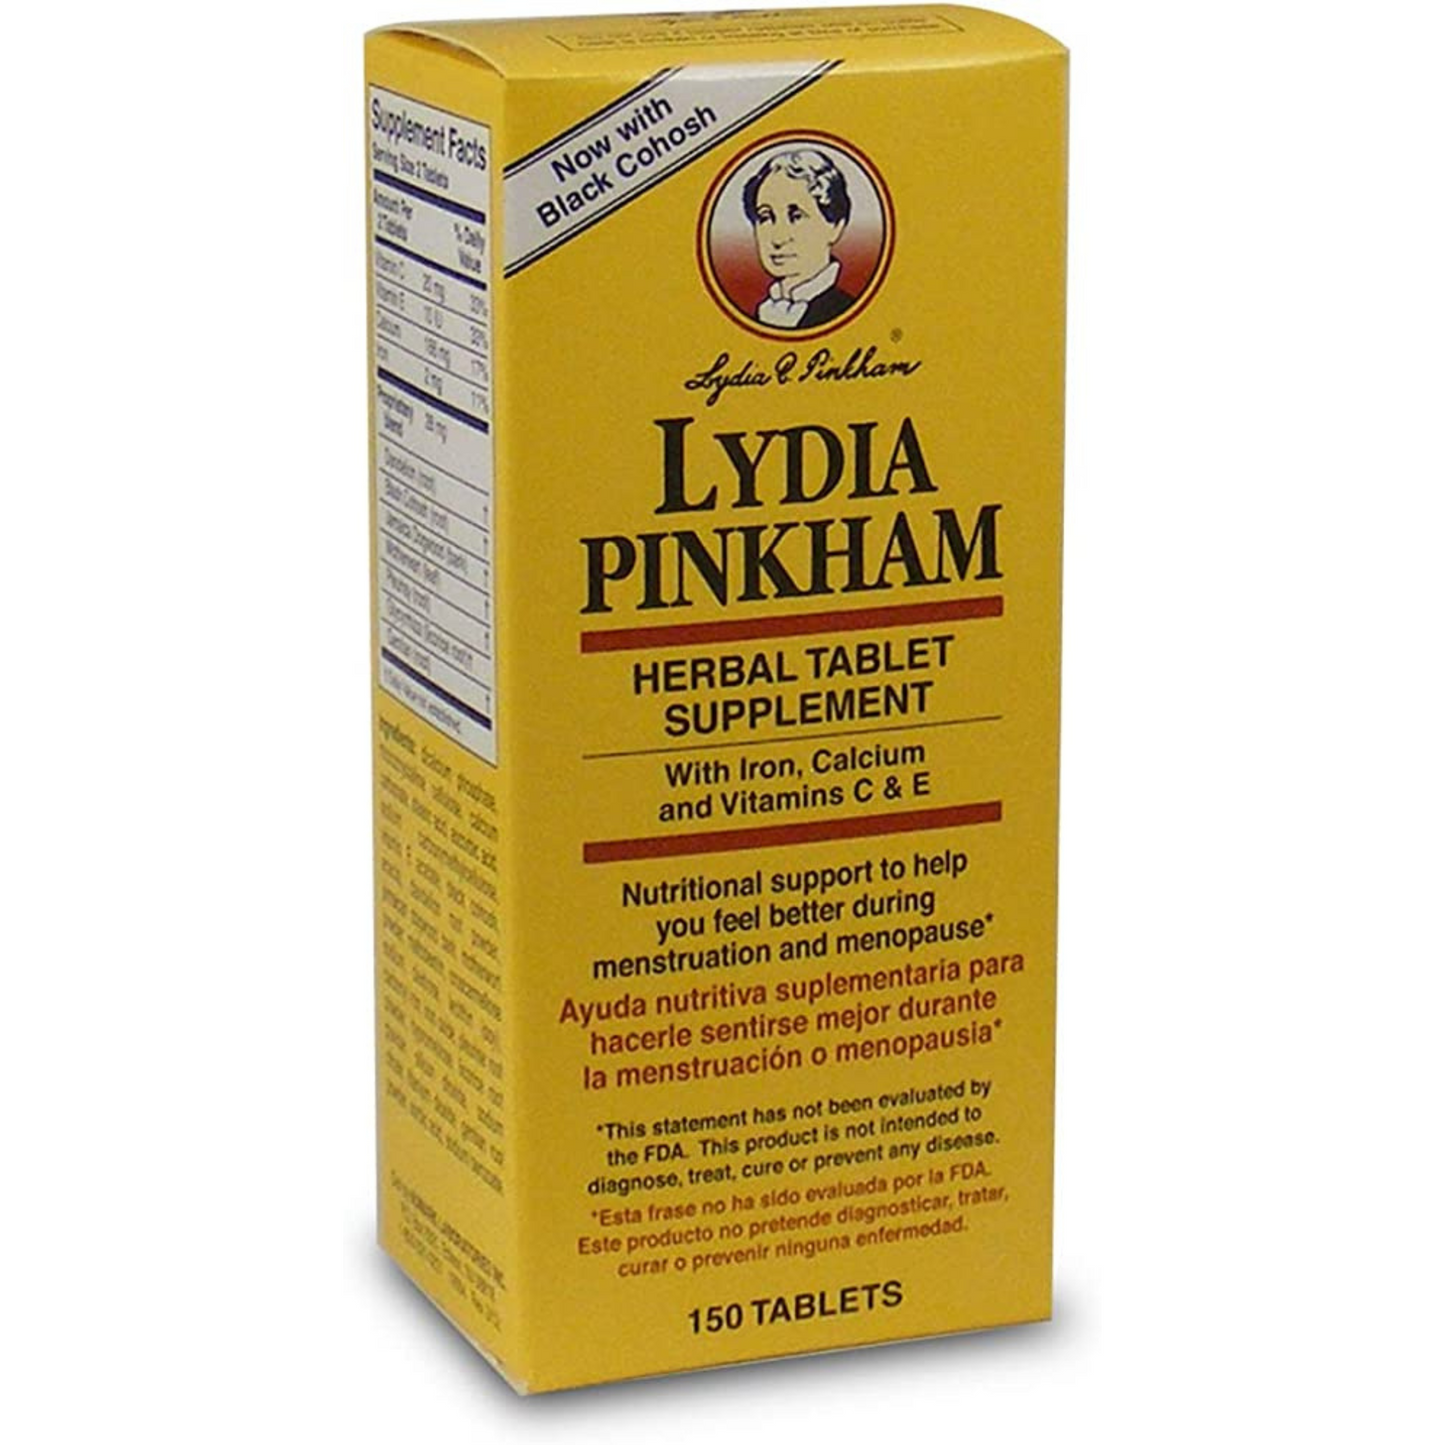 Primary image of Lydia Pinkham Herbal Tablets